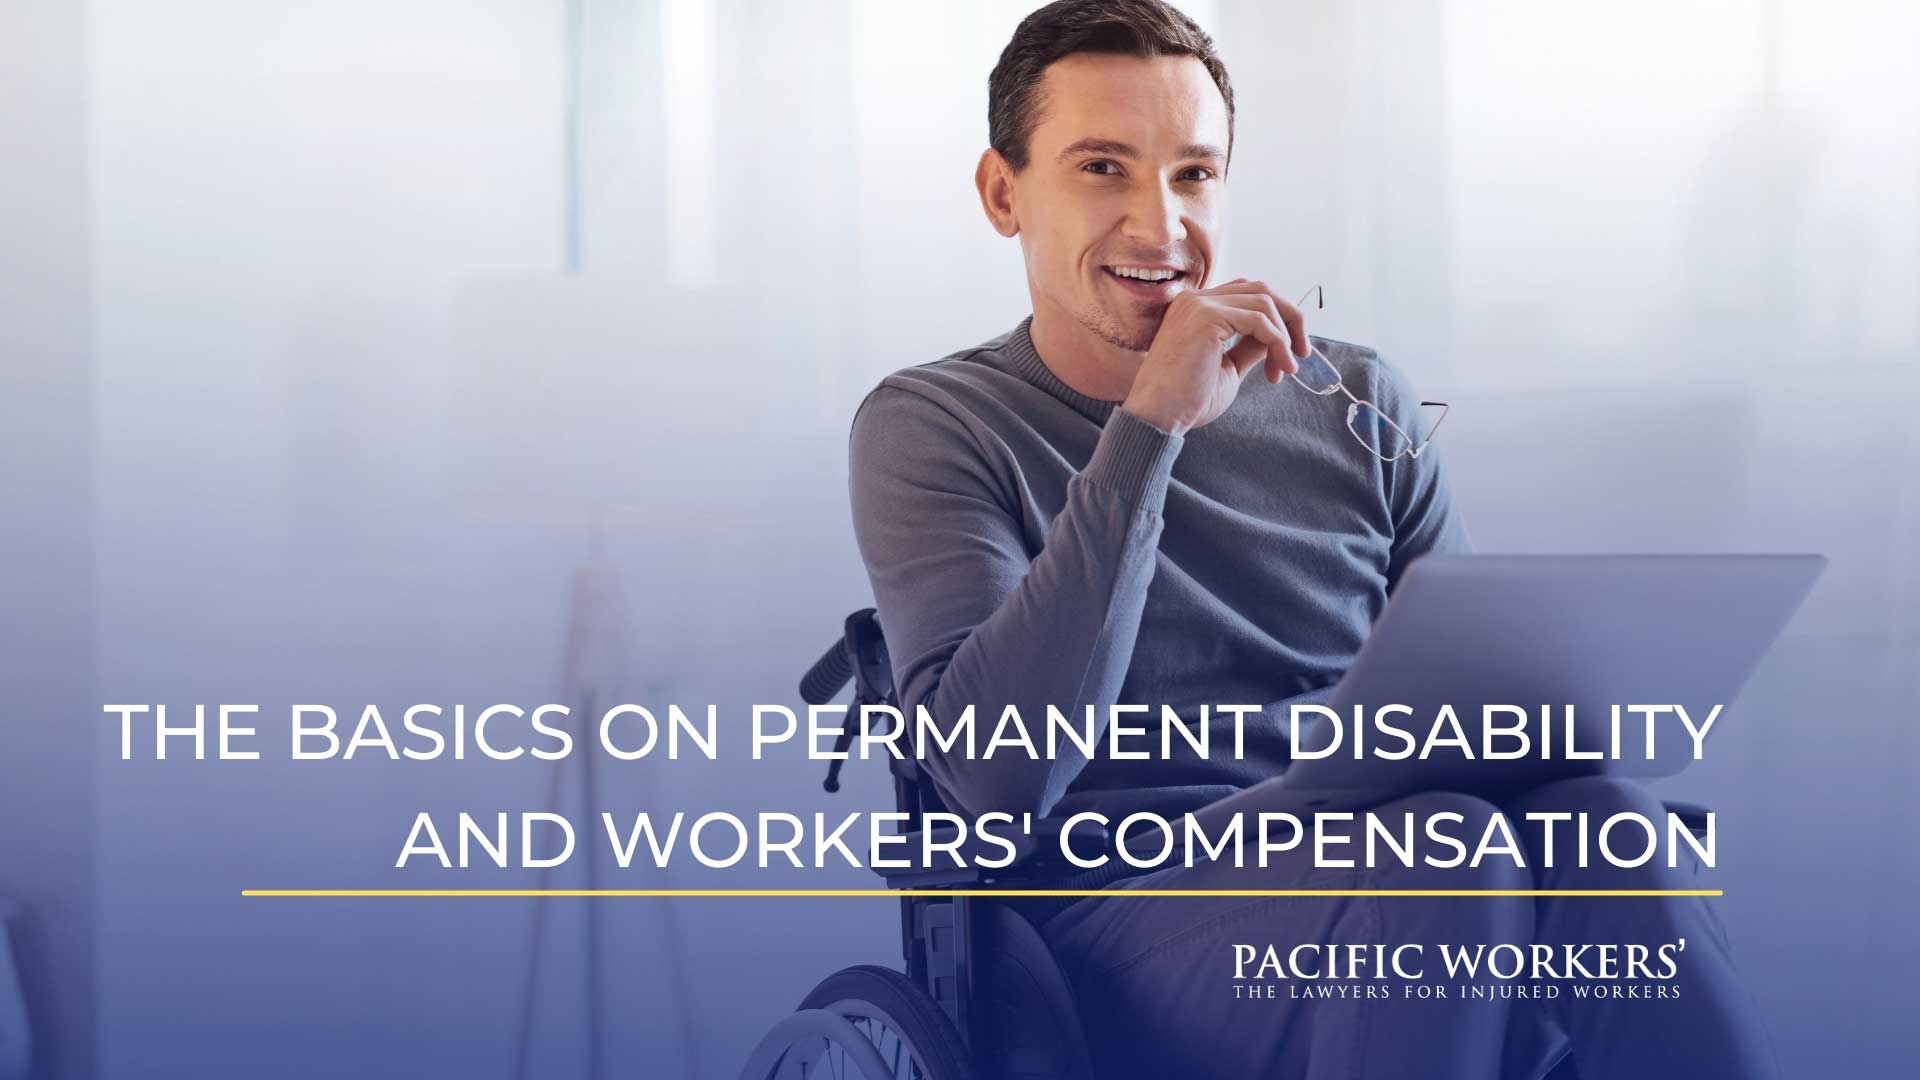 The Basics on Permanent Disability and Workers' Compensation